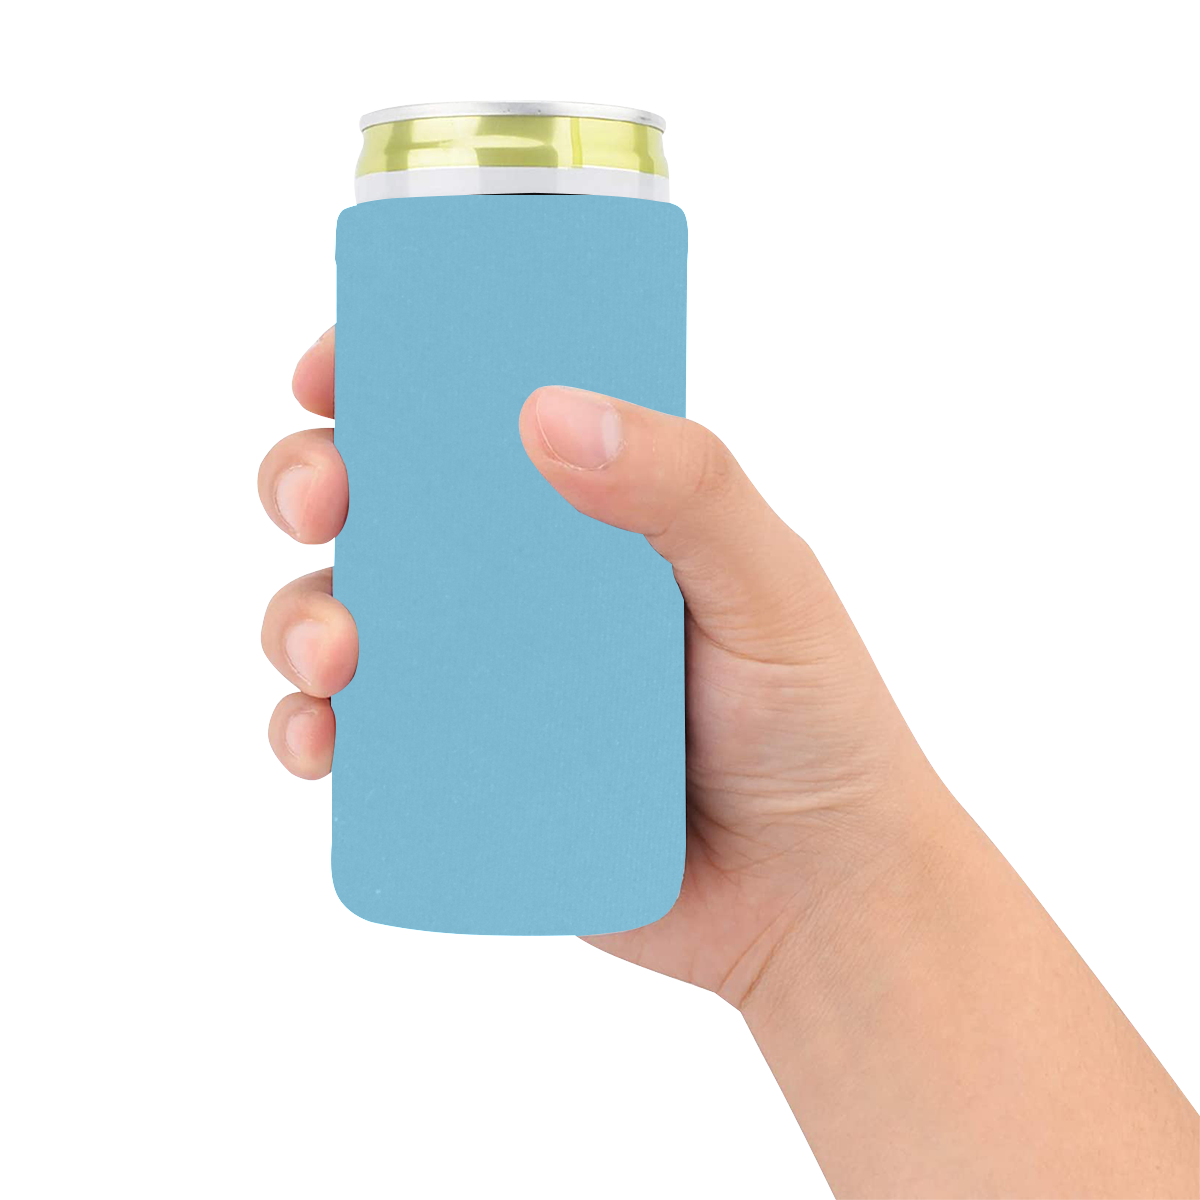 color baby blue Neoprene Can Cooler 5" x 2.3" dia.